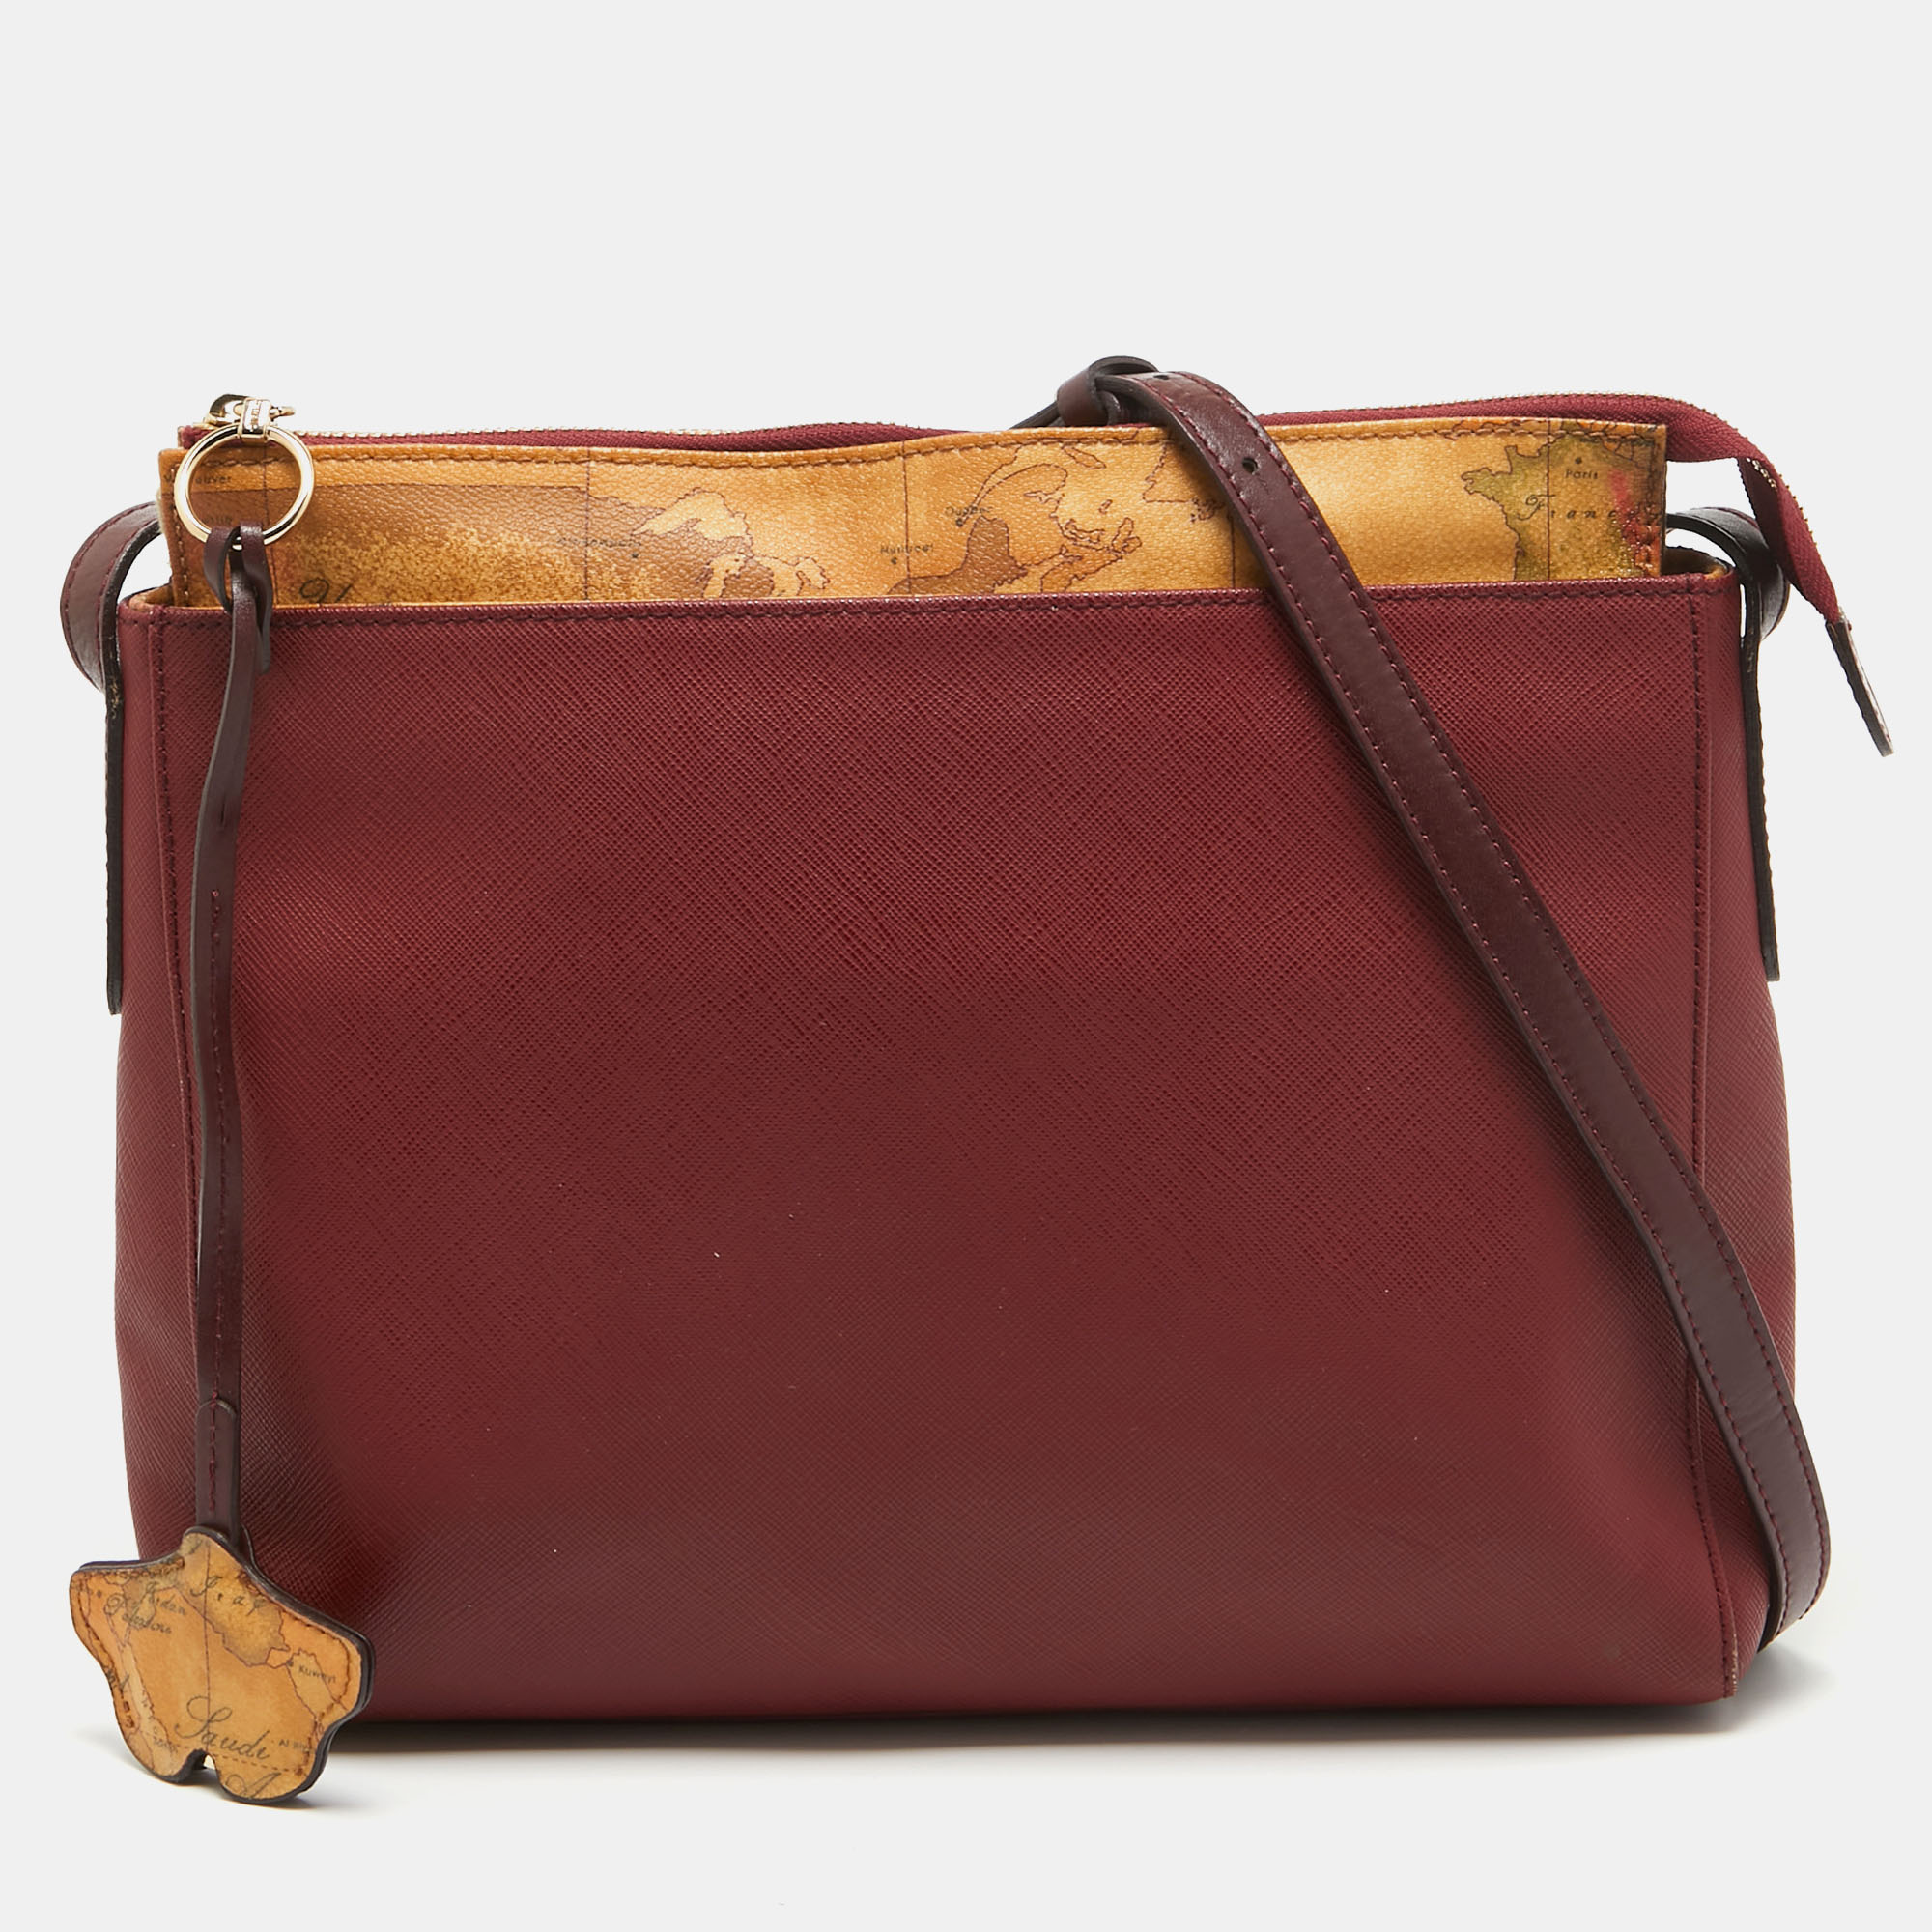 Get style and carry your essentials with ease using this designer shoulder bag. It has been crafted using high quality materials to be a standout accessory.